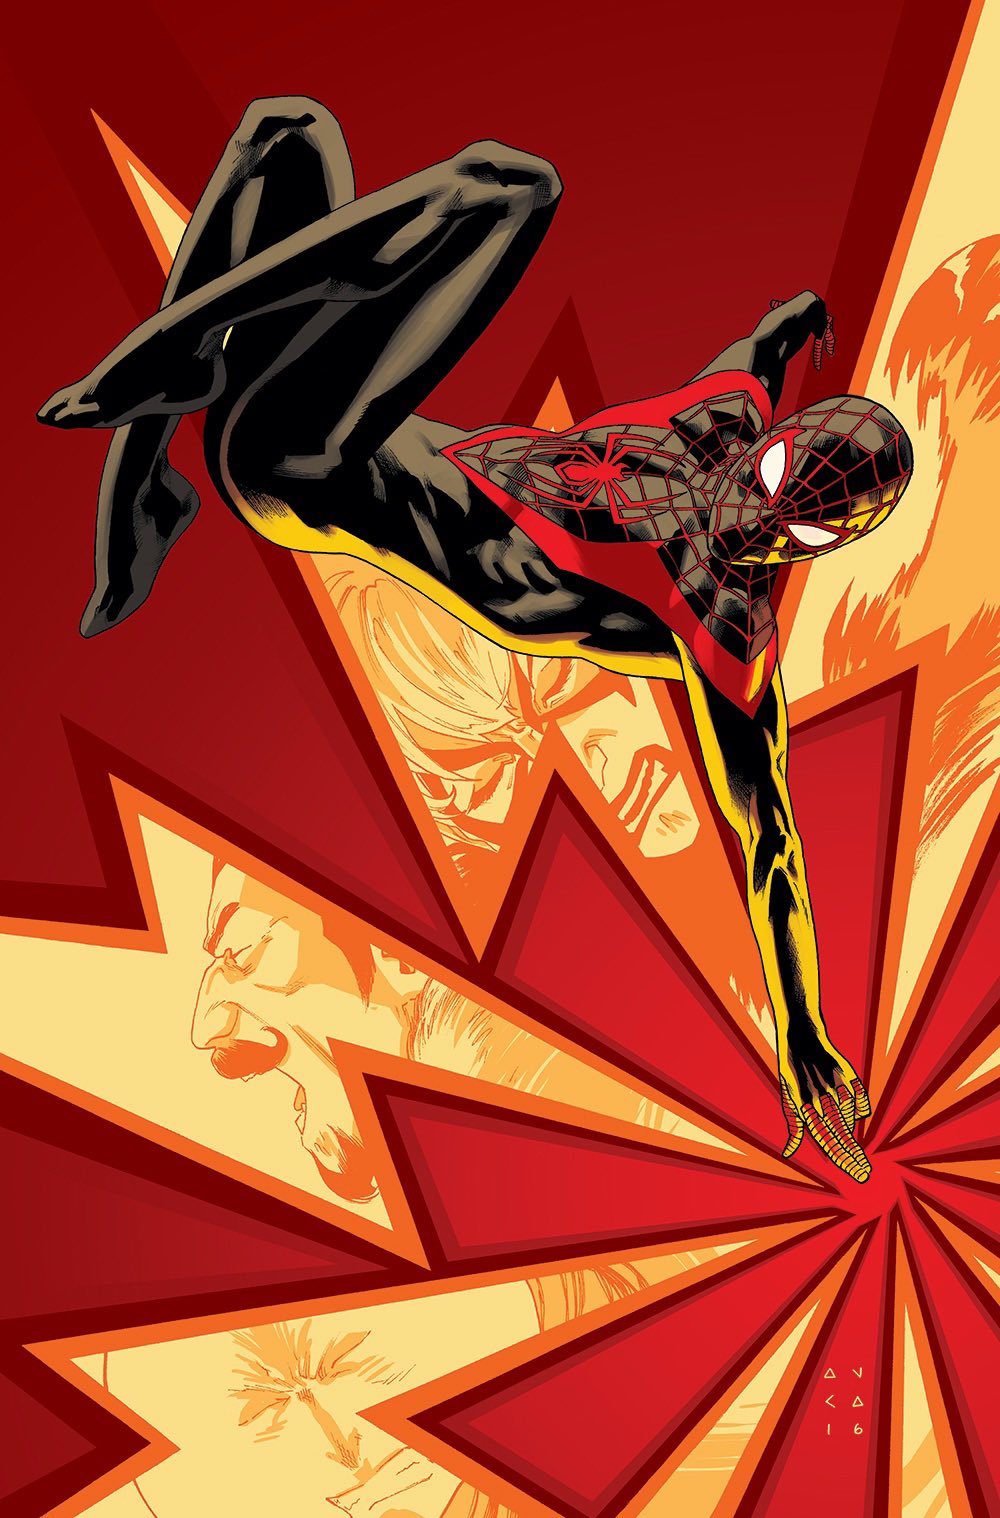 Miles Morales unleashes a Venom Strike on Kris Anka's cover to Spider-Man Annual Vol. 2 #1 "Youngblood" (2018), Marvel Comics